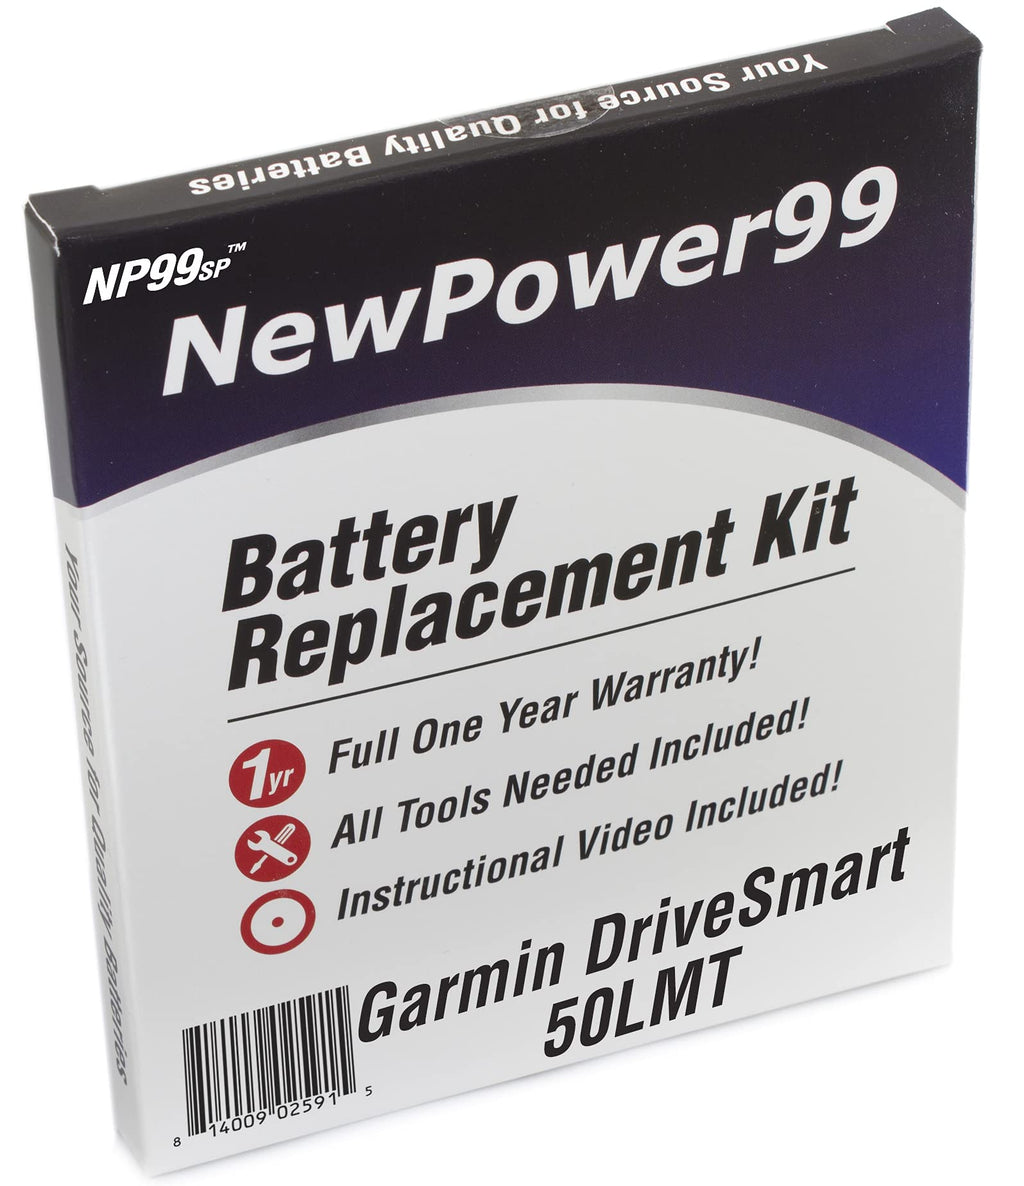  [AUSTRALIA] - Battery Kit for Garmin DriveSmart 50LMT with Battery, How-to Video and Tools from NewPower99